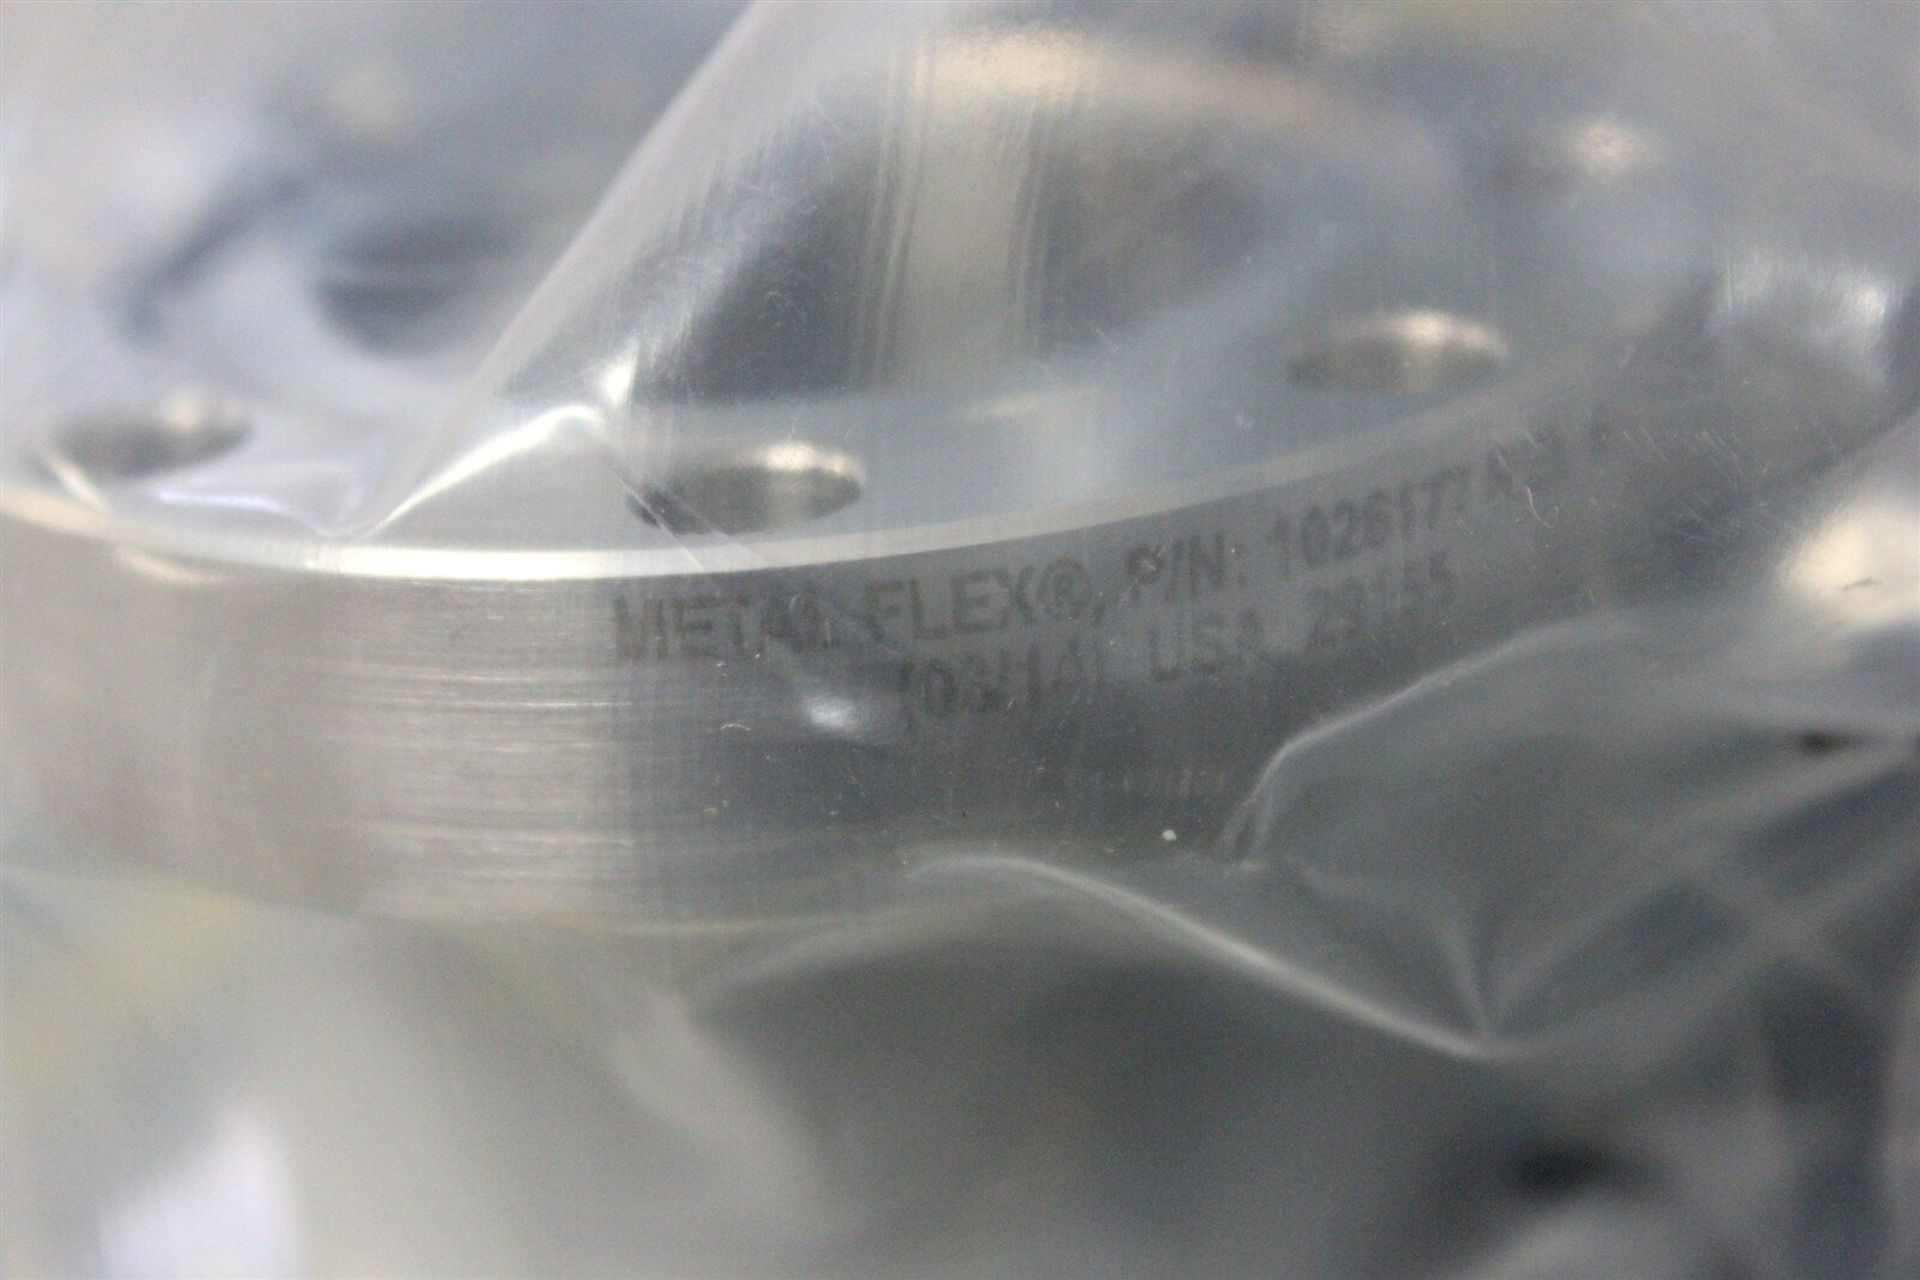 NEW METAL FLEX 3 3/8" STAINLESS STEEL HIGH VACUUM WELDED BELLOWS TUBE FITTING - Image 4 of 6